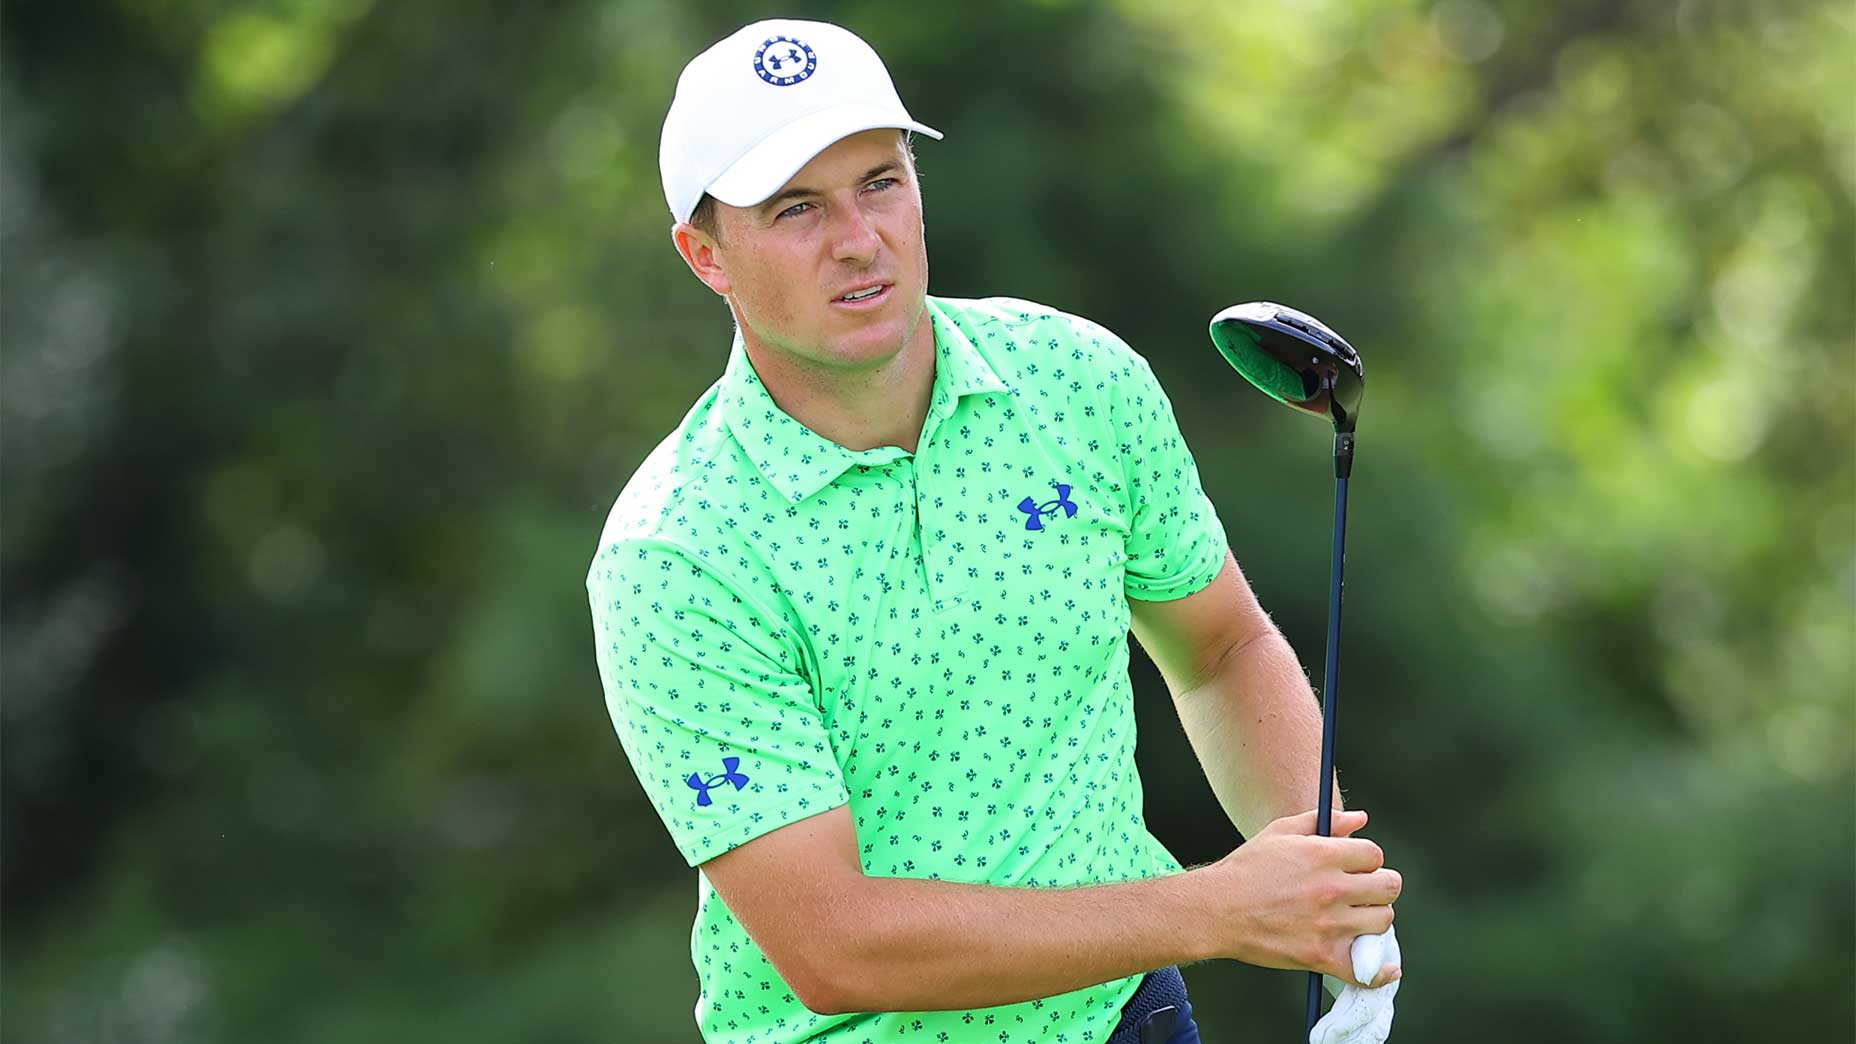 Spieth Id rather play better at the Ryder Cup than the Tour Championship